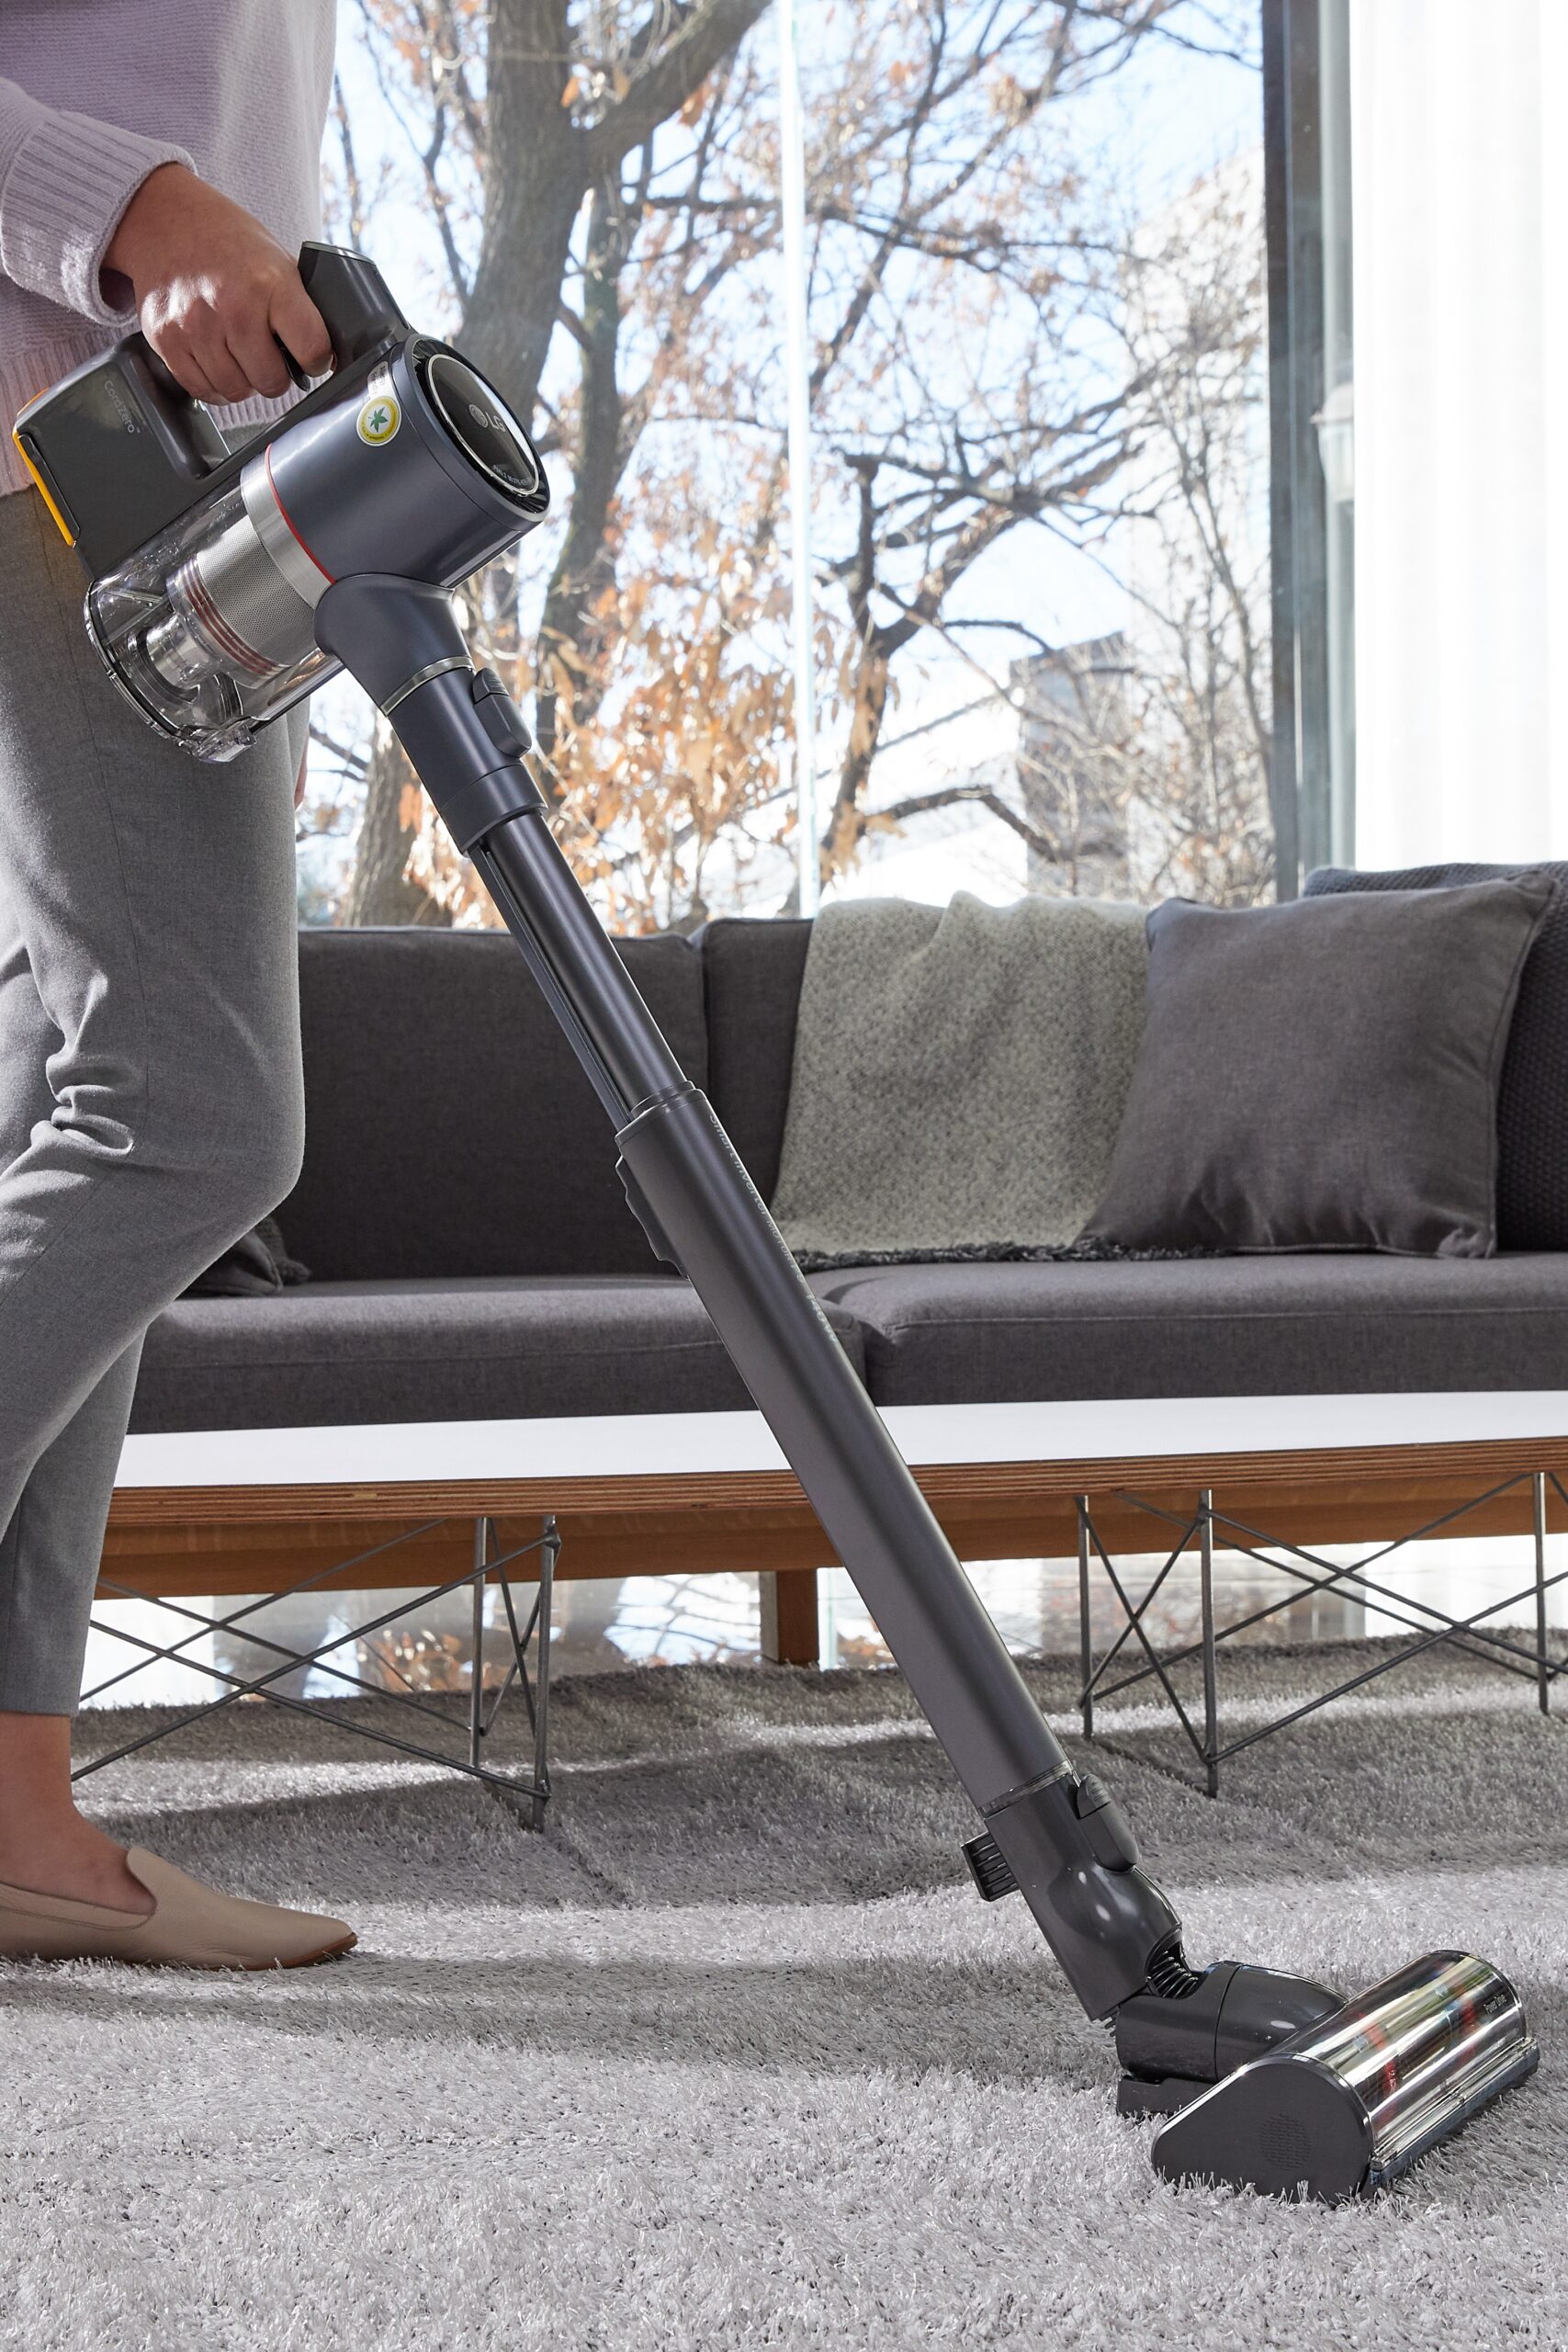 A closer look at LG CordZeroThinQ A9 Stick Vacuum as a woman uses it to clean her living room carpet.